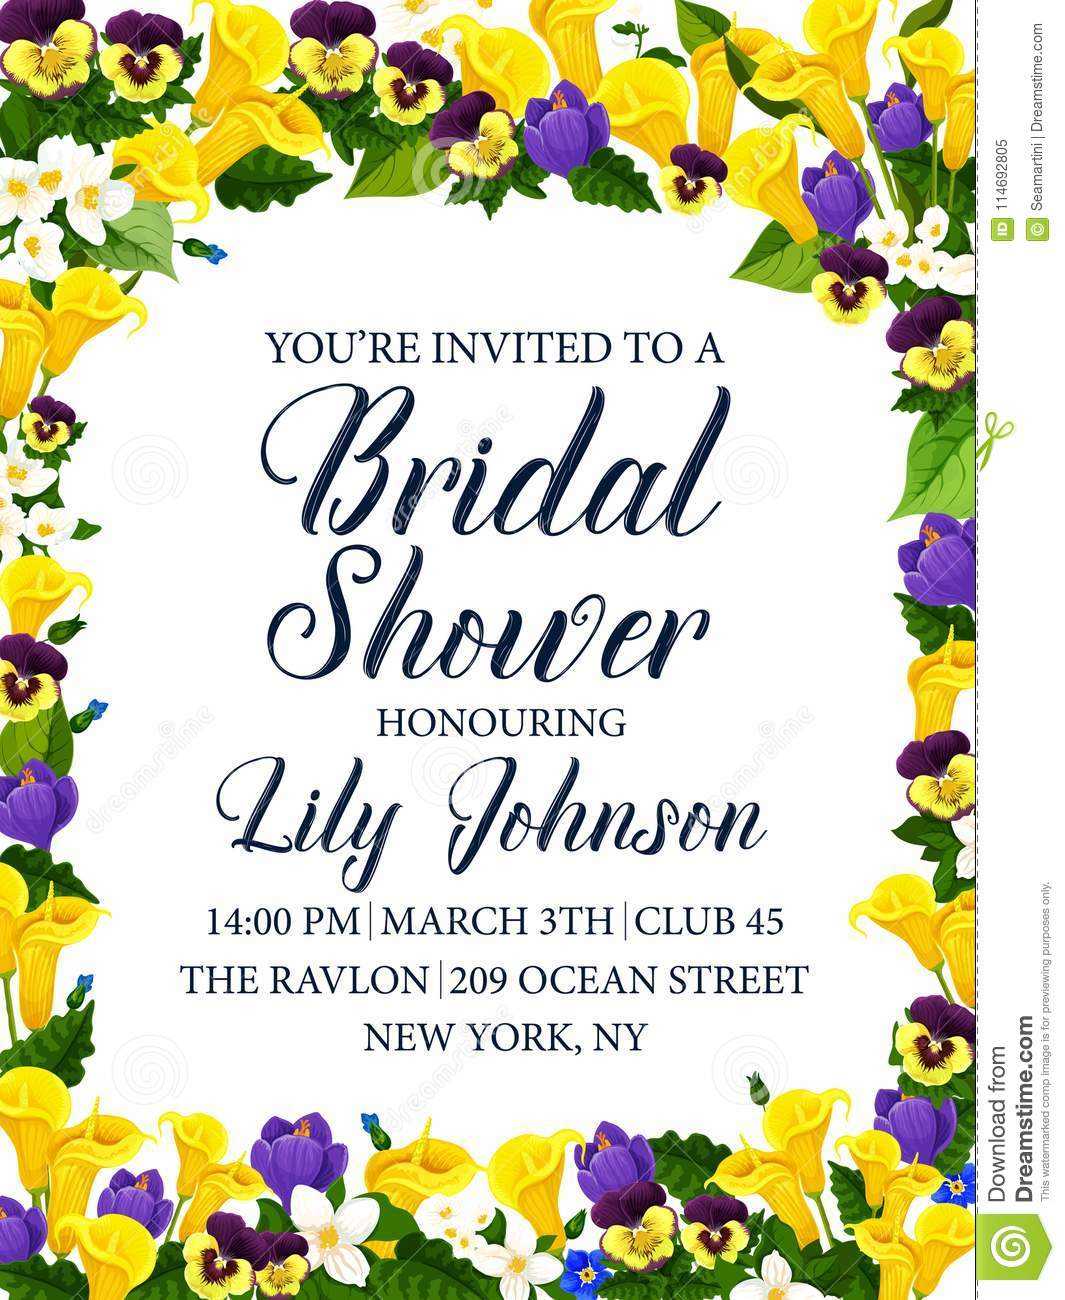 Bridal Shower Banner Template from professional.maexproit.com